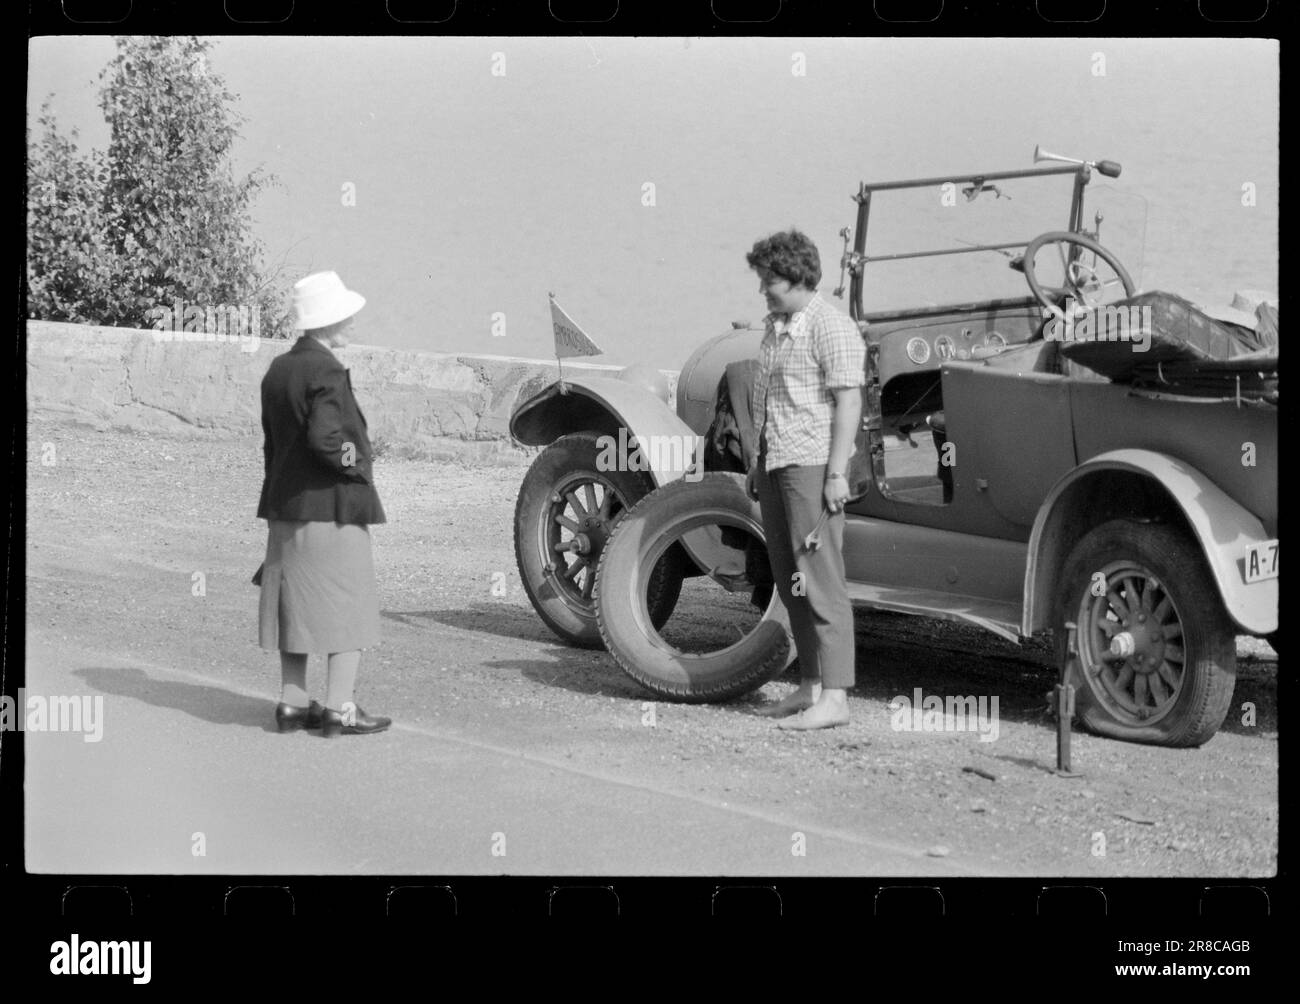 Current 32-7-1960: On the fly with old wheels.Can a young lady of today manage to master a capricious old car on hard mountain roads? Sverre A. Børretzen describes a daring journey Oslo - Årdal - Oslo with the Buick Ambrosius (41 years old) driven by Brit Hedberg (21 years old). Close to Fagernes with a punctured rear tyre. Will someone help help a punctured lady? Brit tried it with sad results. Photo: Sverre A. Børretzen / Aktuell ****PHOTO IS NOT IMAGE PROCESSED*** Stock Photo